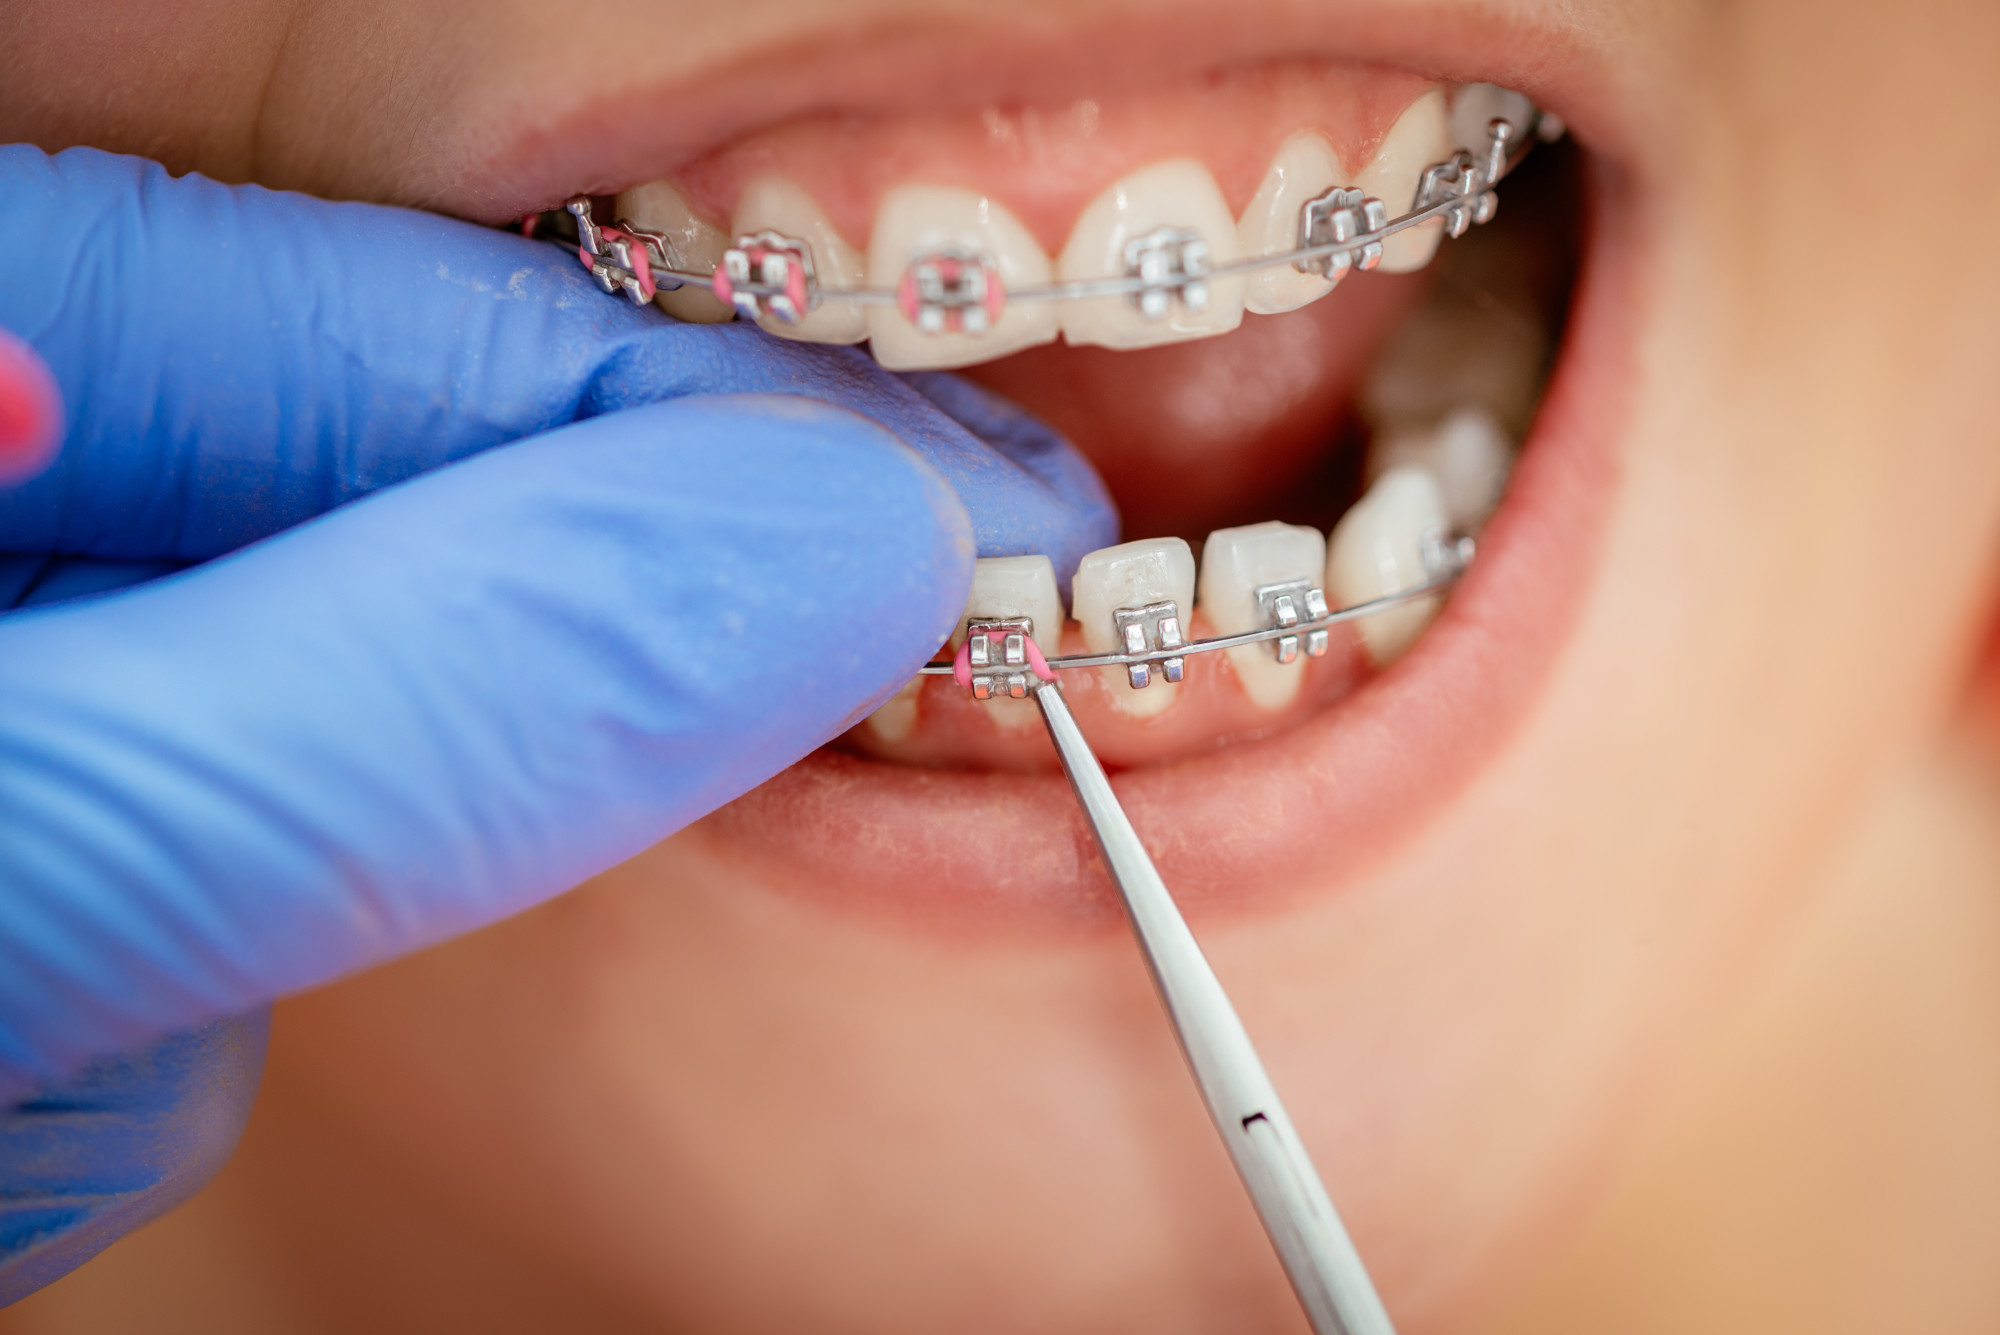 7 of the Most Common Reasons for Braces (Medical and Cosmetic)